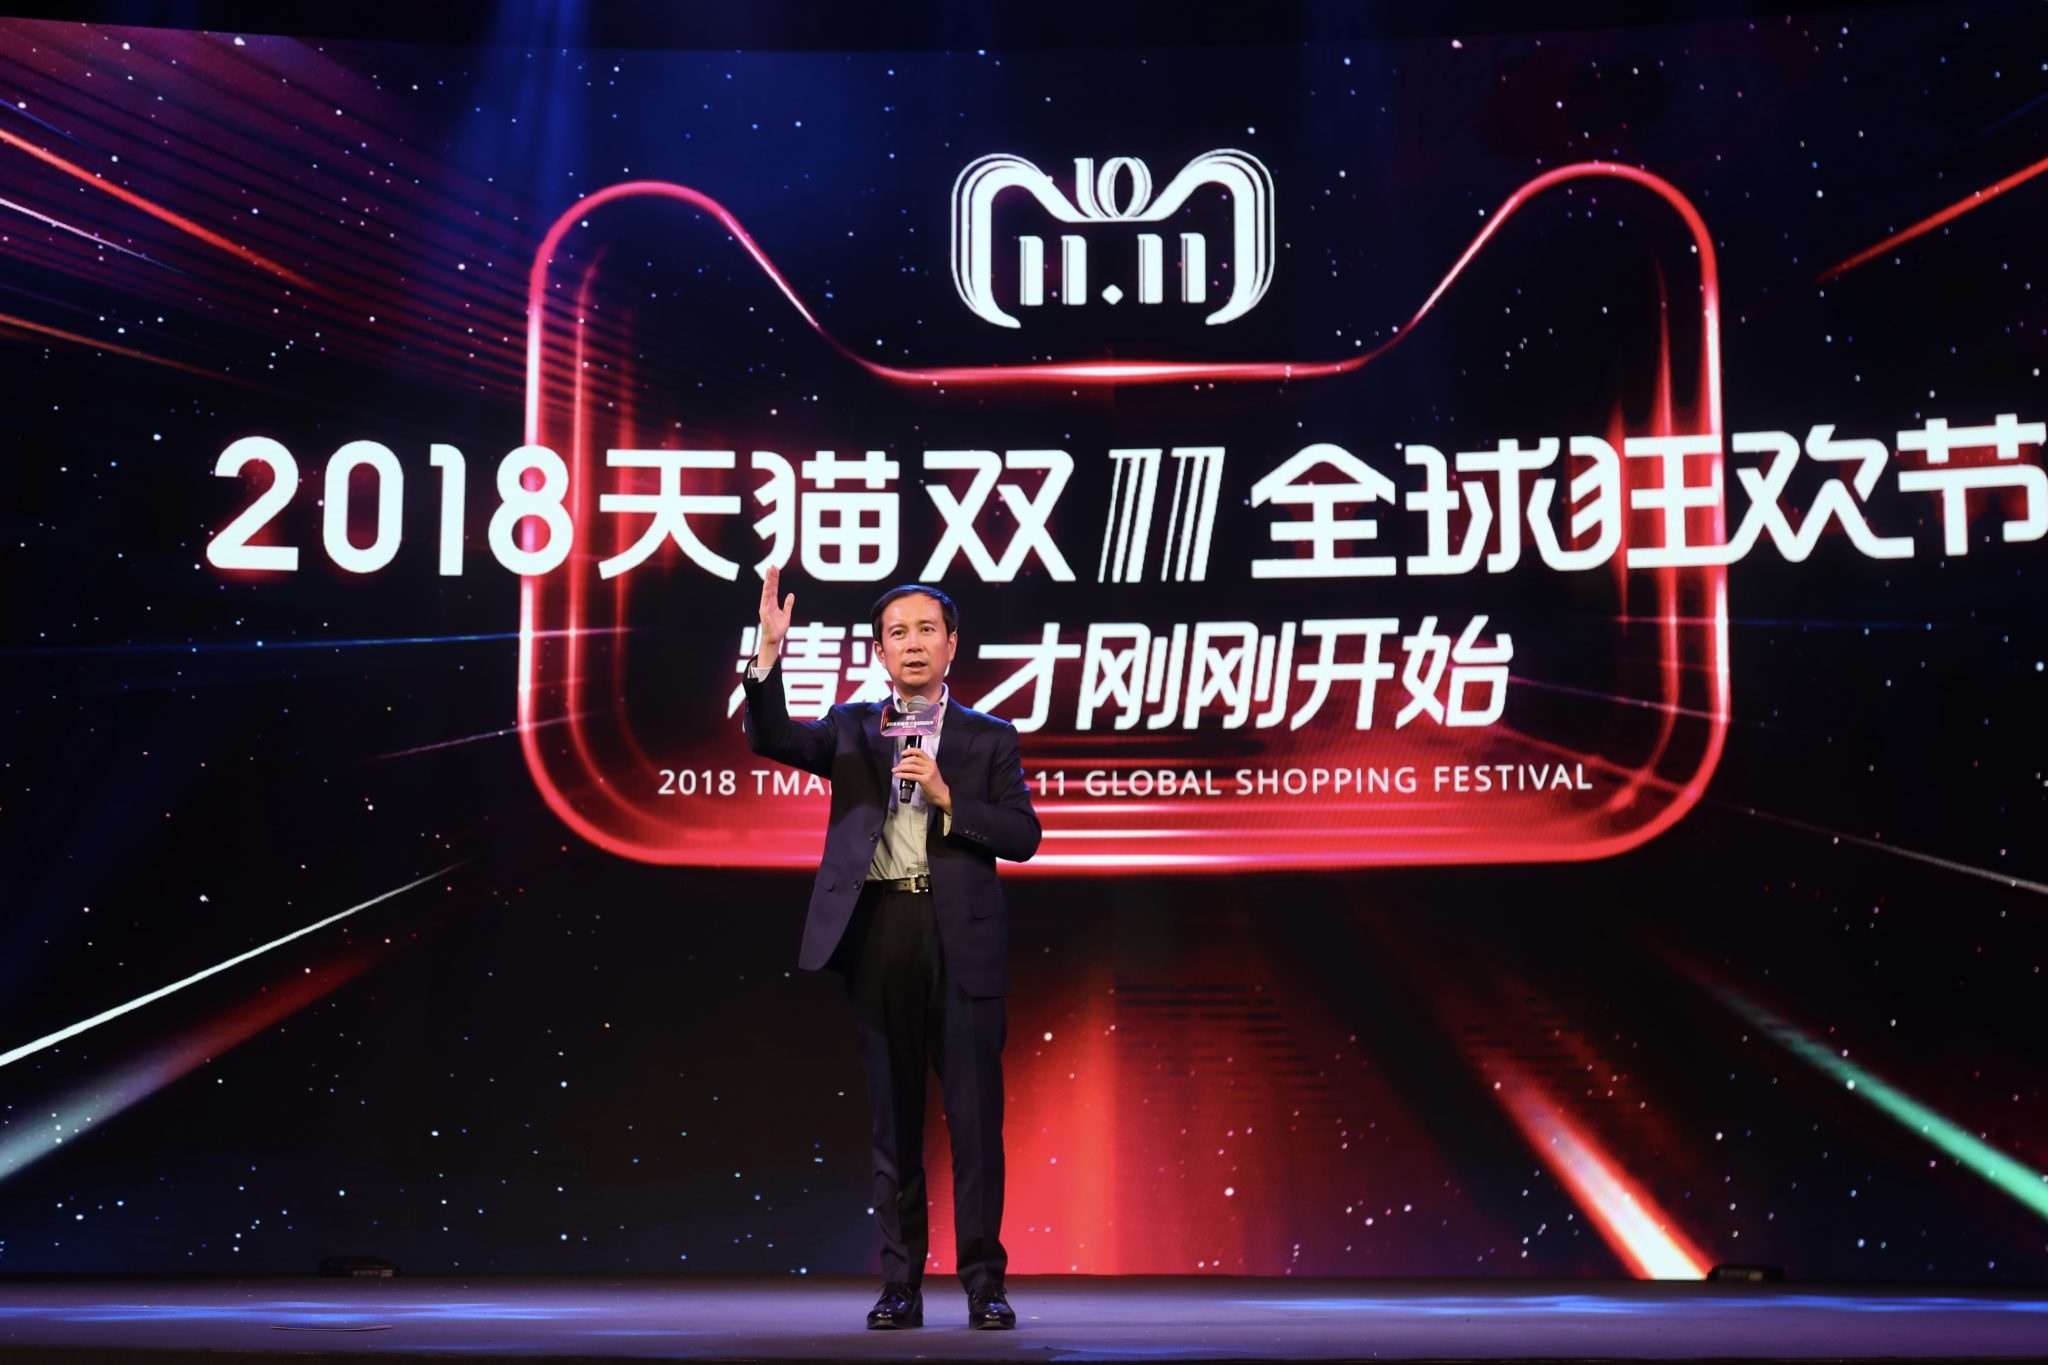 Alibaba Group CEO Daniel Zhang speaks at the 11.11 kick-off press conference in Beijing. Courtesy photo